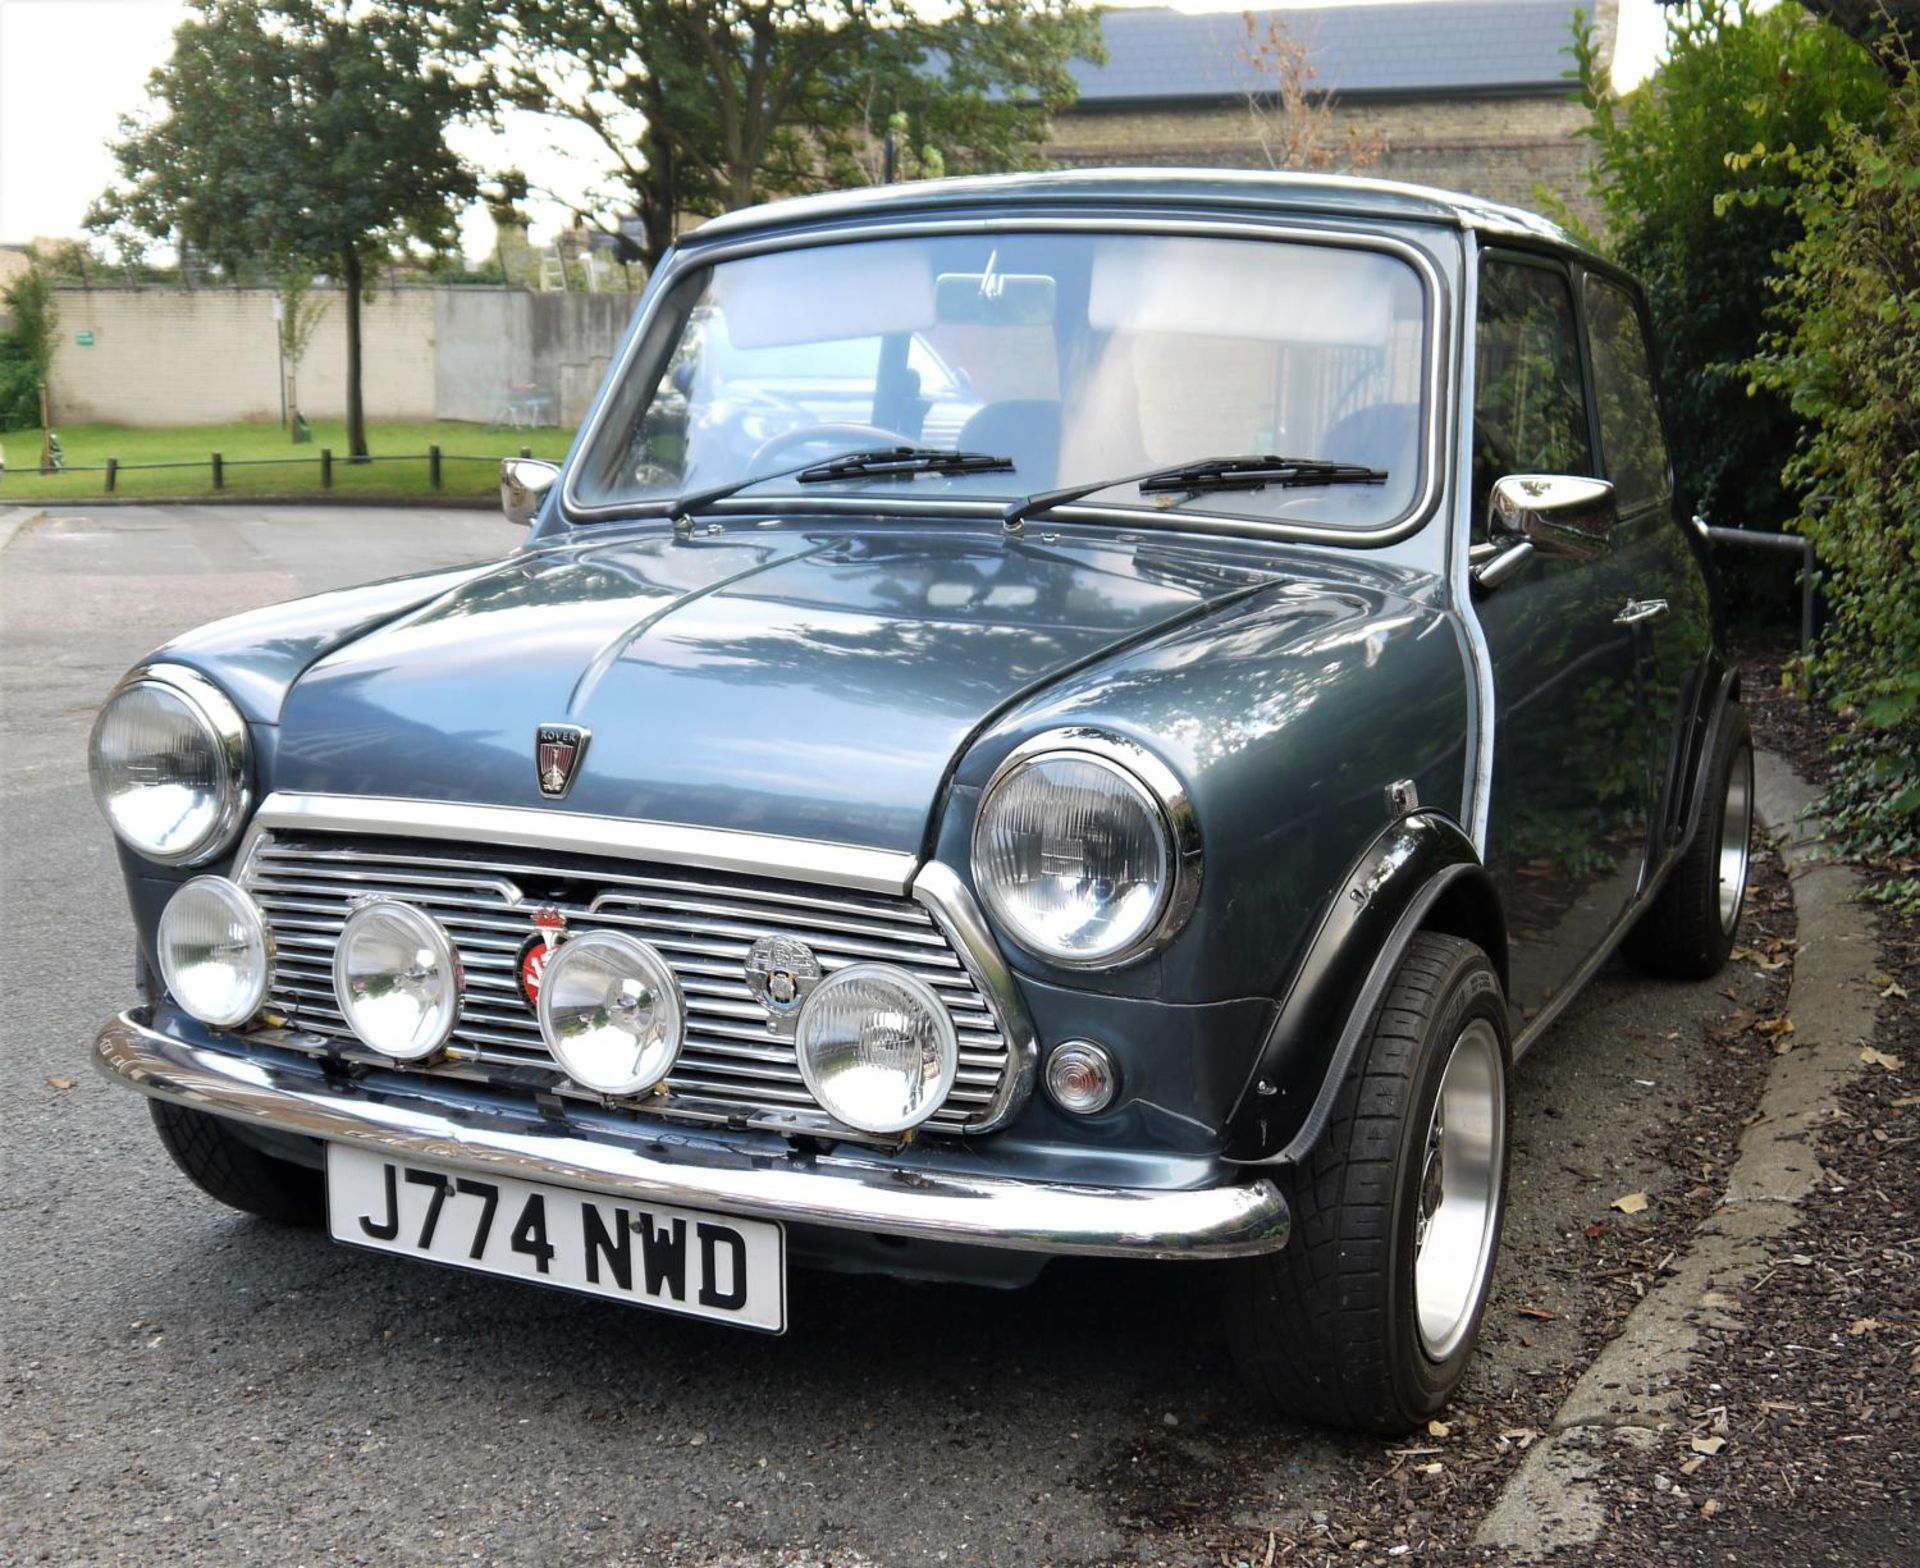 1991 ROVER MINI NEON Registration Number: J774 NWD Recorded Mileage: 58,000 miles Chassis Number: - Image 5 of 24